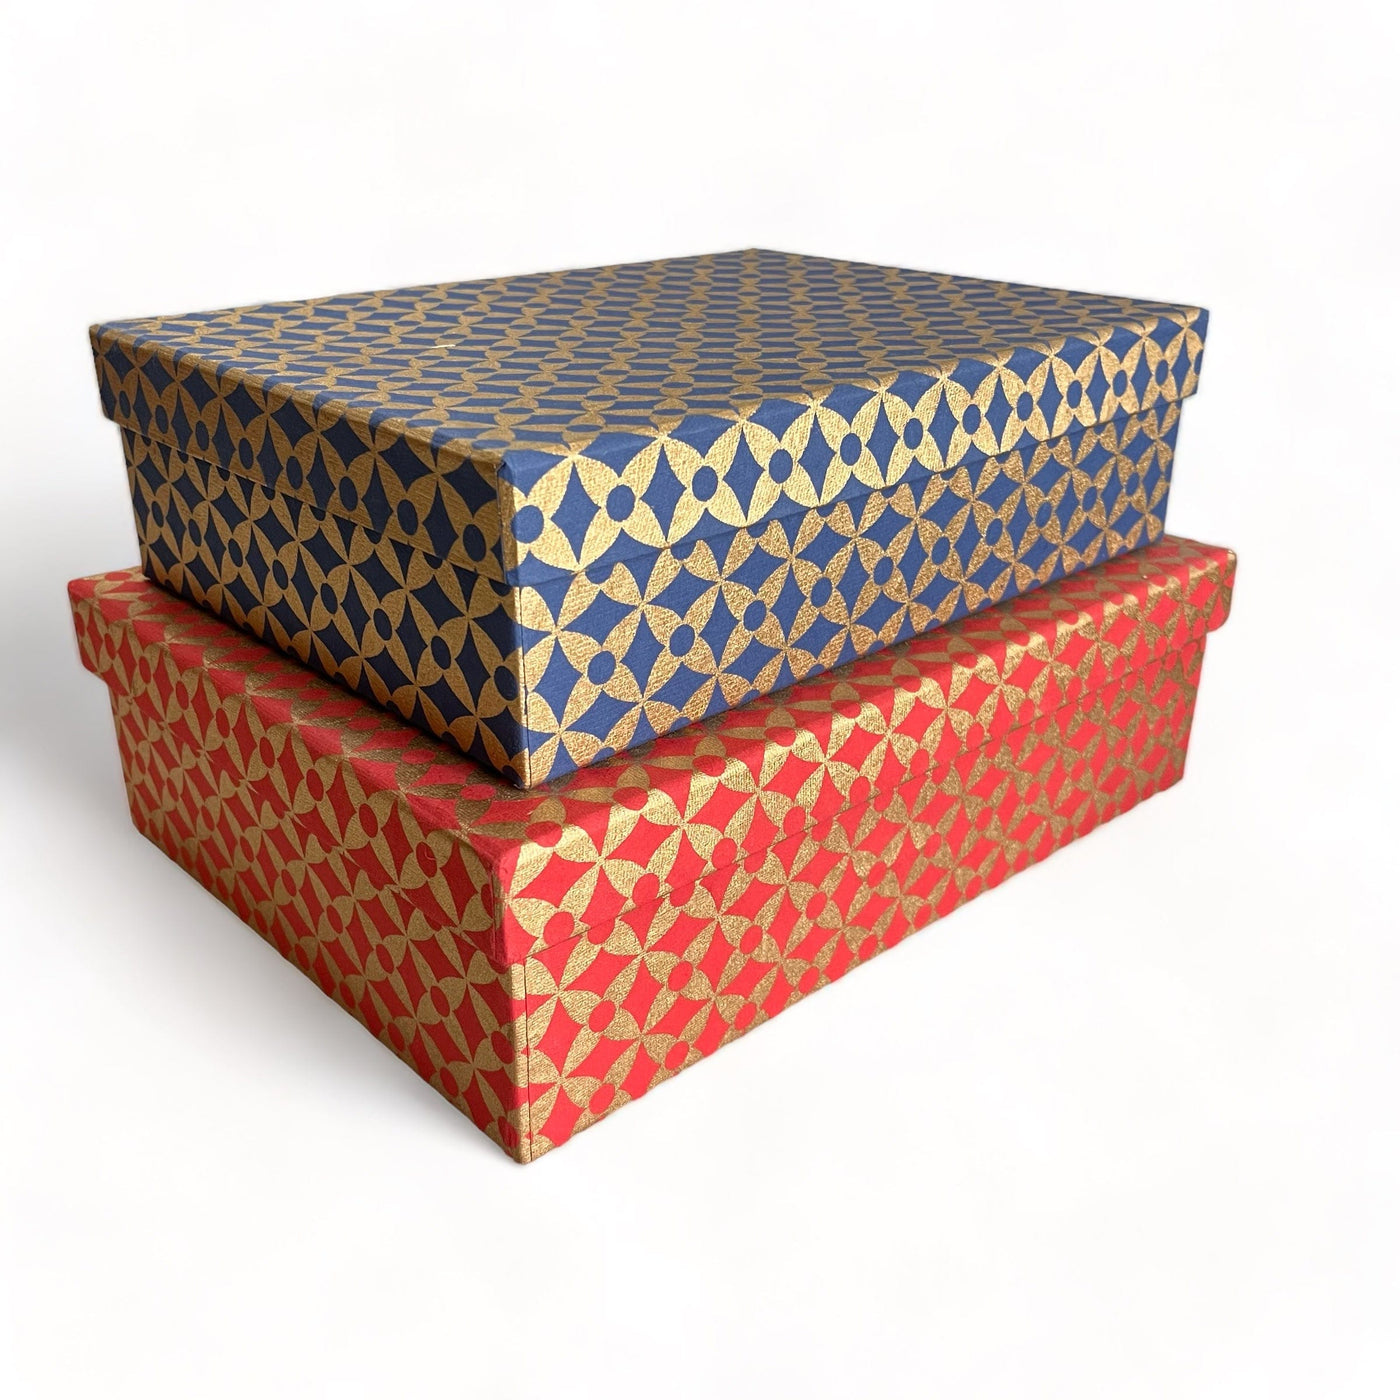 Gift Boxes Anaya | Set of 2 Empty Gift Boxes for Gifting